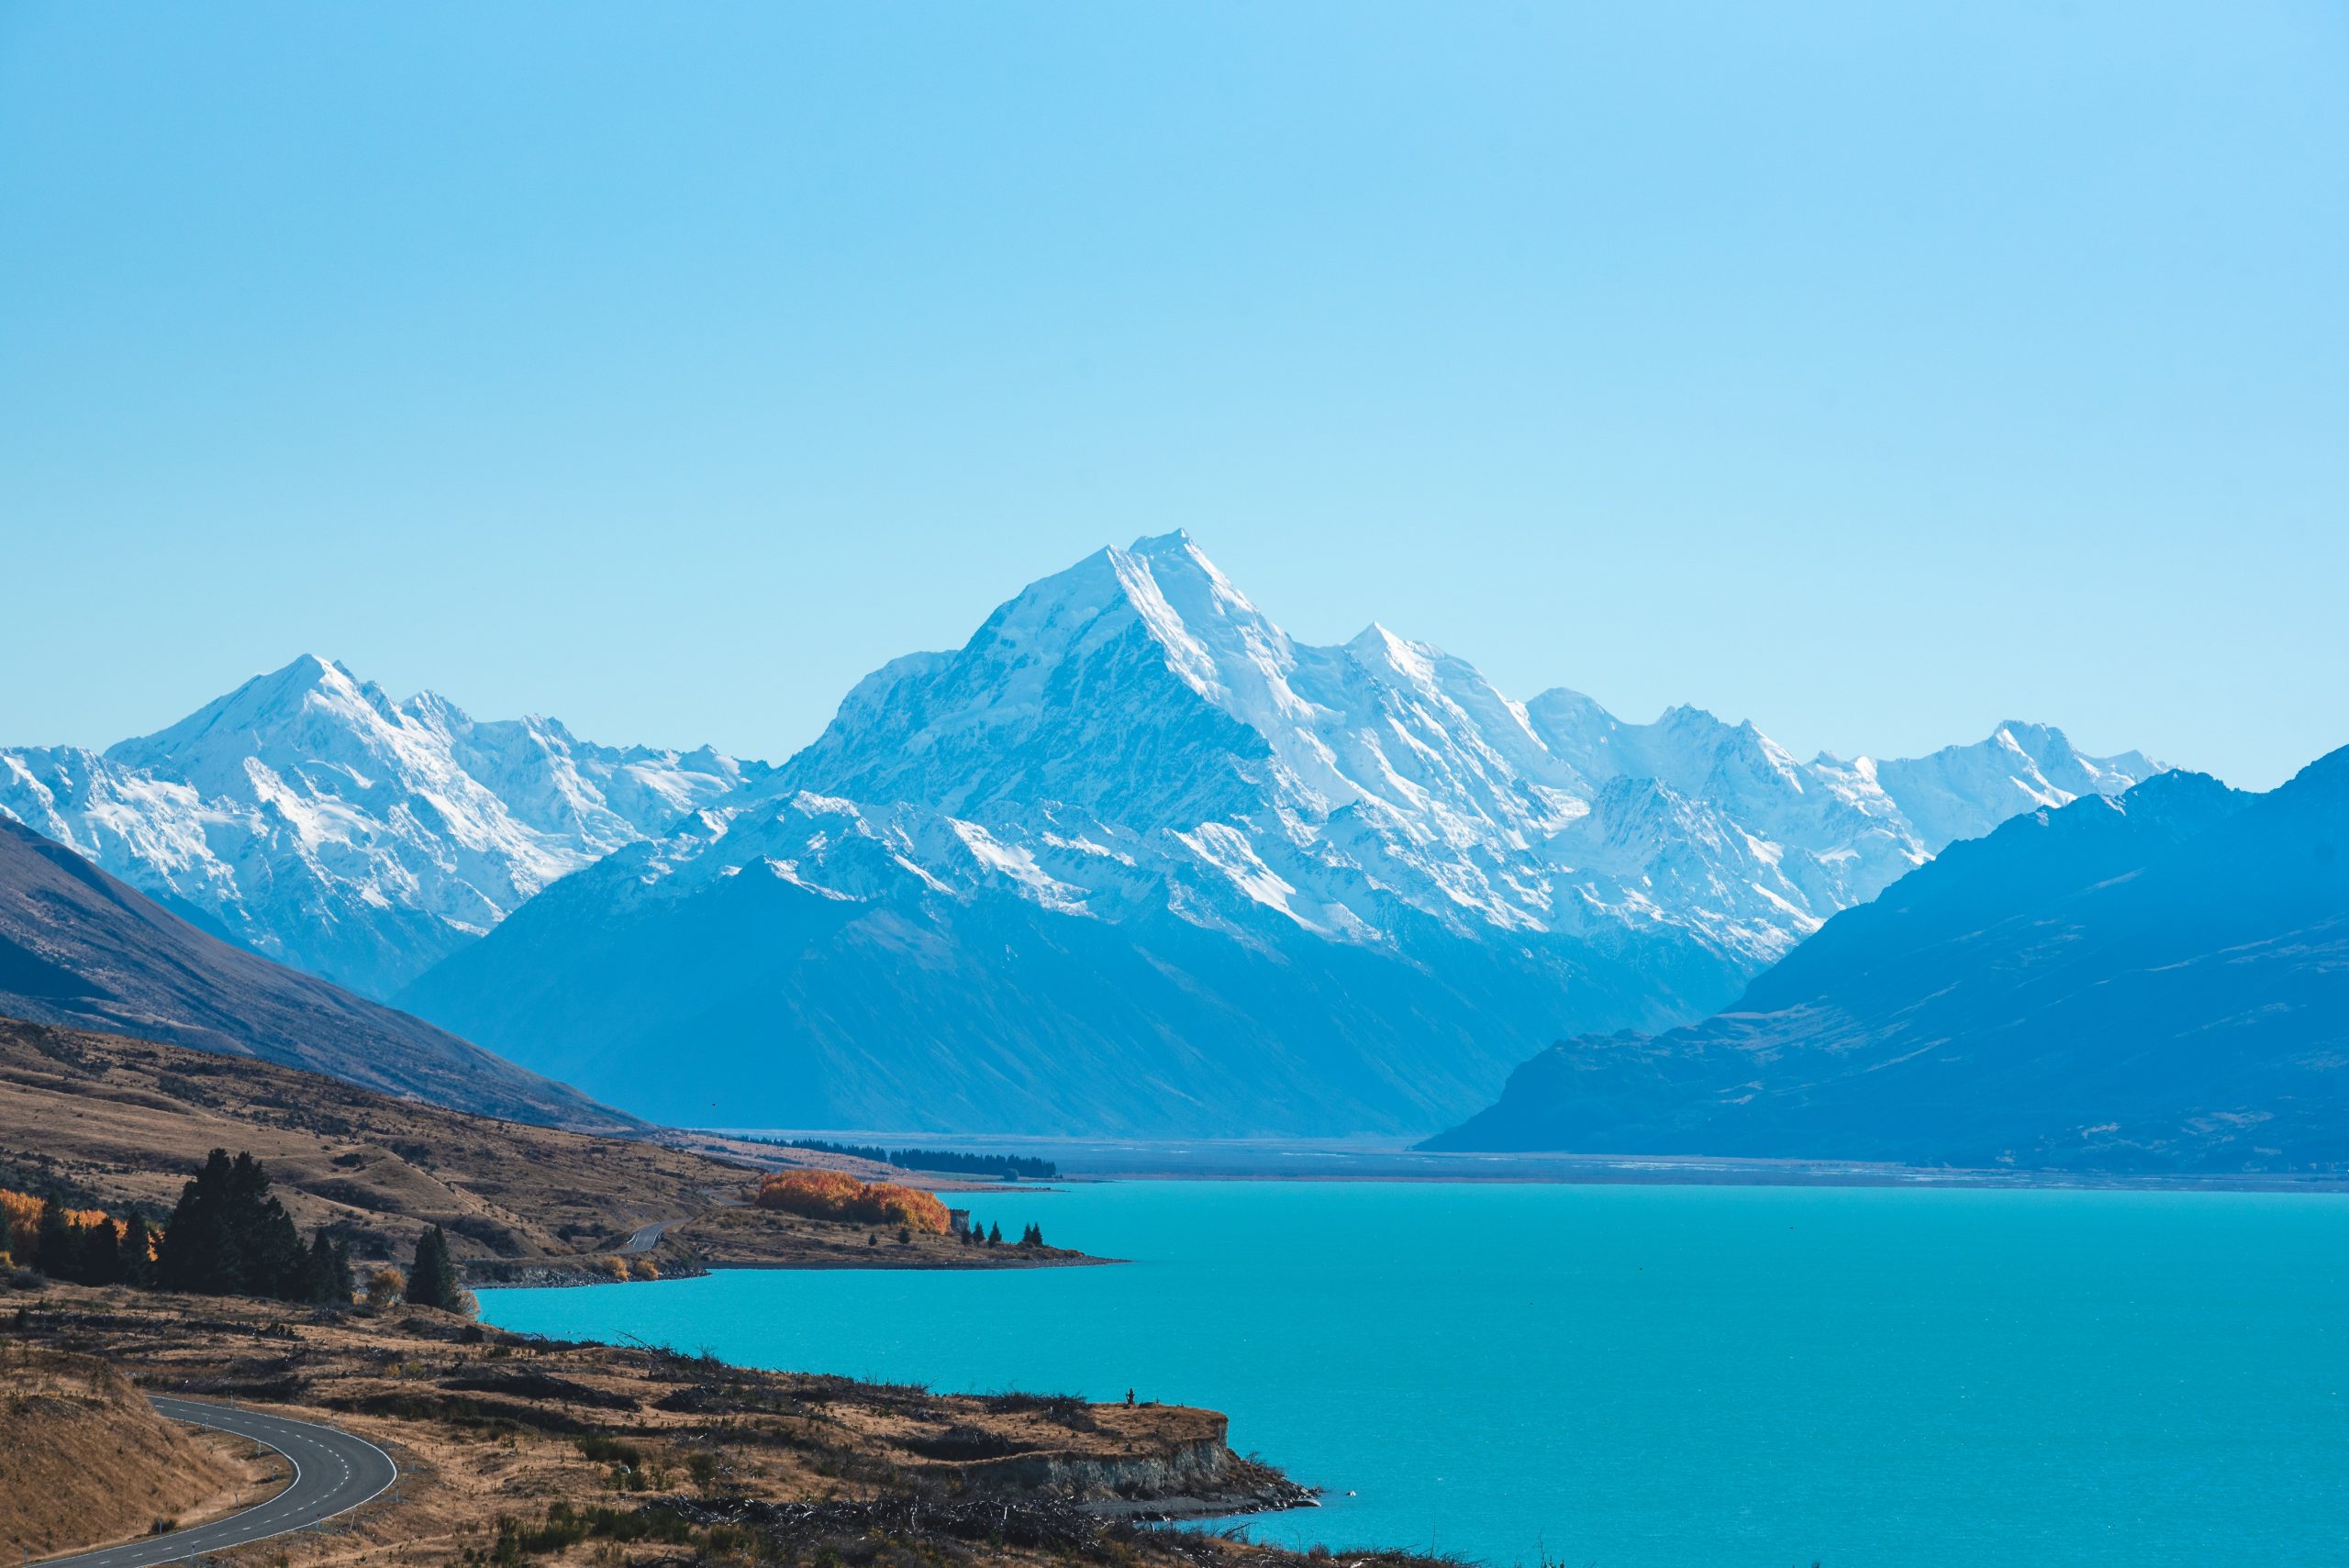 A turquoise blue lake in front of towering snow-capped mountains with a winding road on the left leading towards the mountain range.